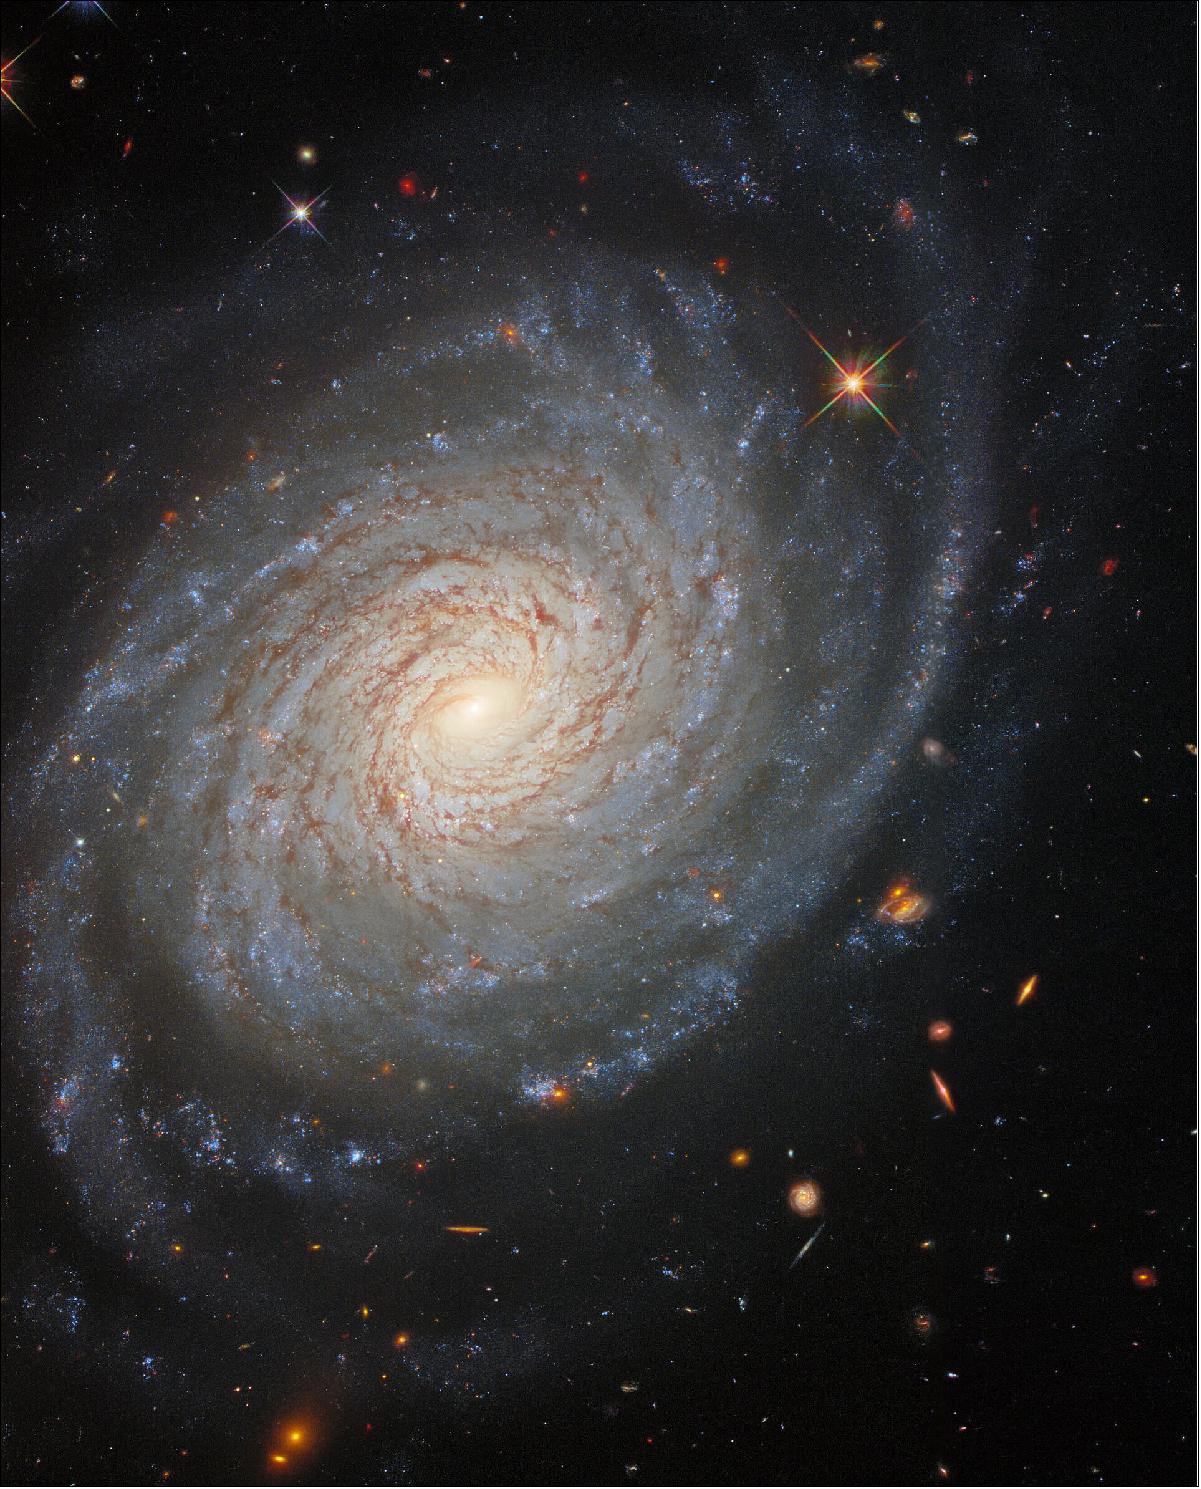 Figure 82: Supernovae are also a useful aid for astronomers who measure the distances to faraway galaxies. The amount of energy thrown out into space by supernova explosions is very uniform, allowing astronomers to estimate their distances from how bright they appear to be when viewed from Earth. This image — which was created using data from Hubble’s Wide Field Camera 3 — comes from a large collection of Hubble observations of nearby galaxies which host supernovae as well as a pulsating class of stars known as Cepheid variables. Both Cepheids and supernovae are used to measure astronomical distances, and galaxies containing both objects provide useful natural laboratories where the two methods can be calibrated against one another (image credit: ESA/Hubble & NASA, D. Jones, A. Riess et al.; CC BY 4.0)